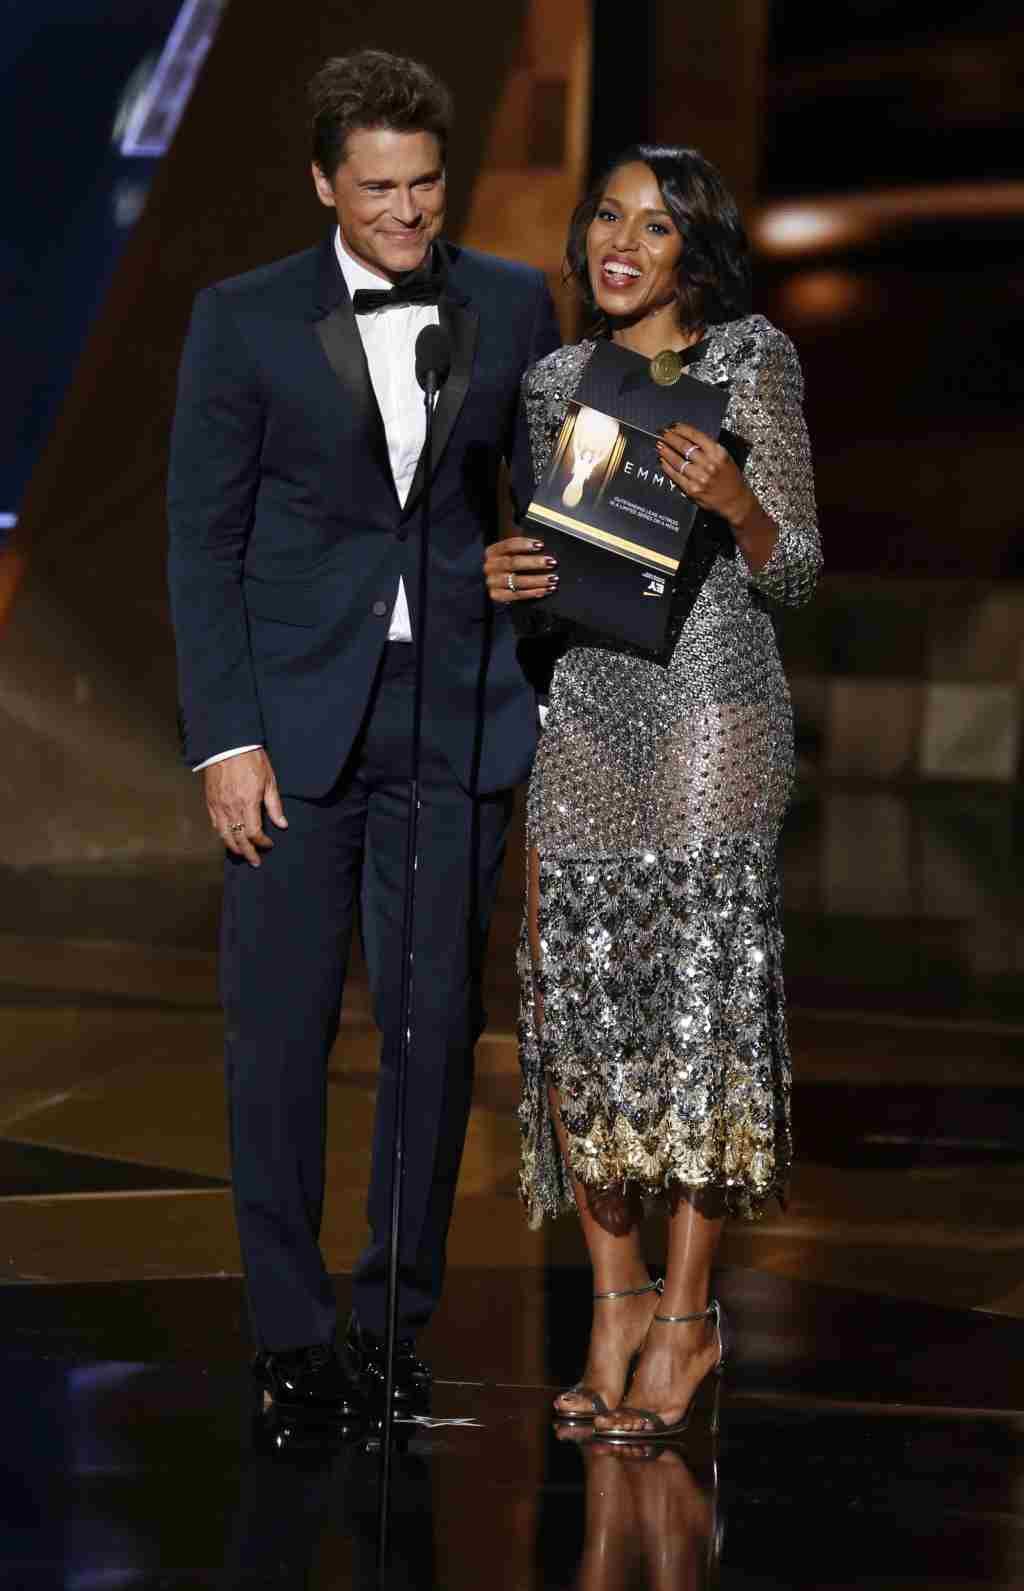 Presenters Rob Lowe and Kerry Washington at the Emmys 2015